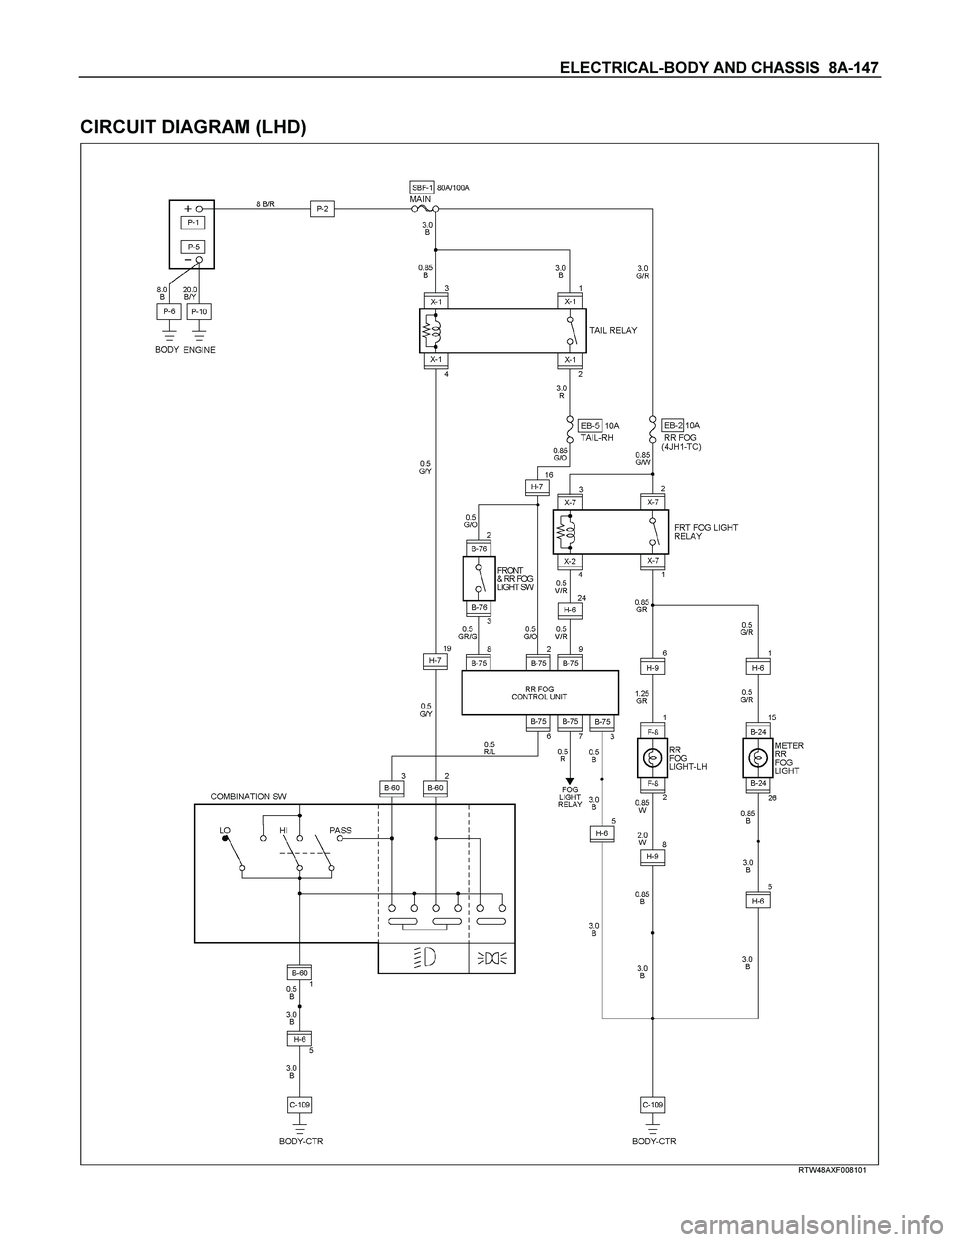 ISUZU TF SERIES 2004  Workshop Manual ELECTRICAL-BODY AND CHASSIS  8A-147 
 
CIRCUIT DIAGRAM (LHD) 
  
 
 
 
RTW48AXF008101 
  